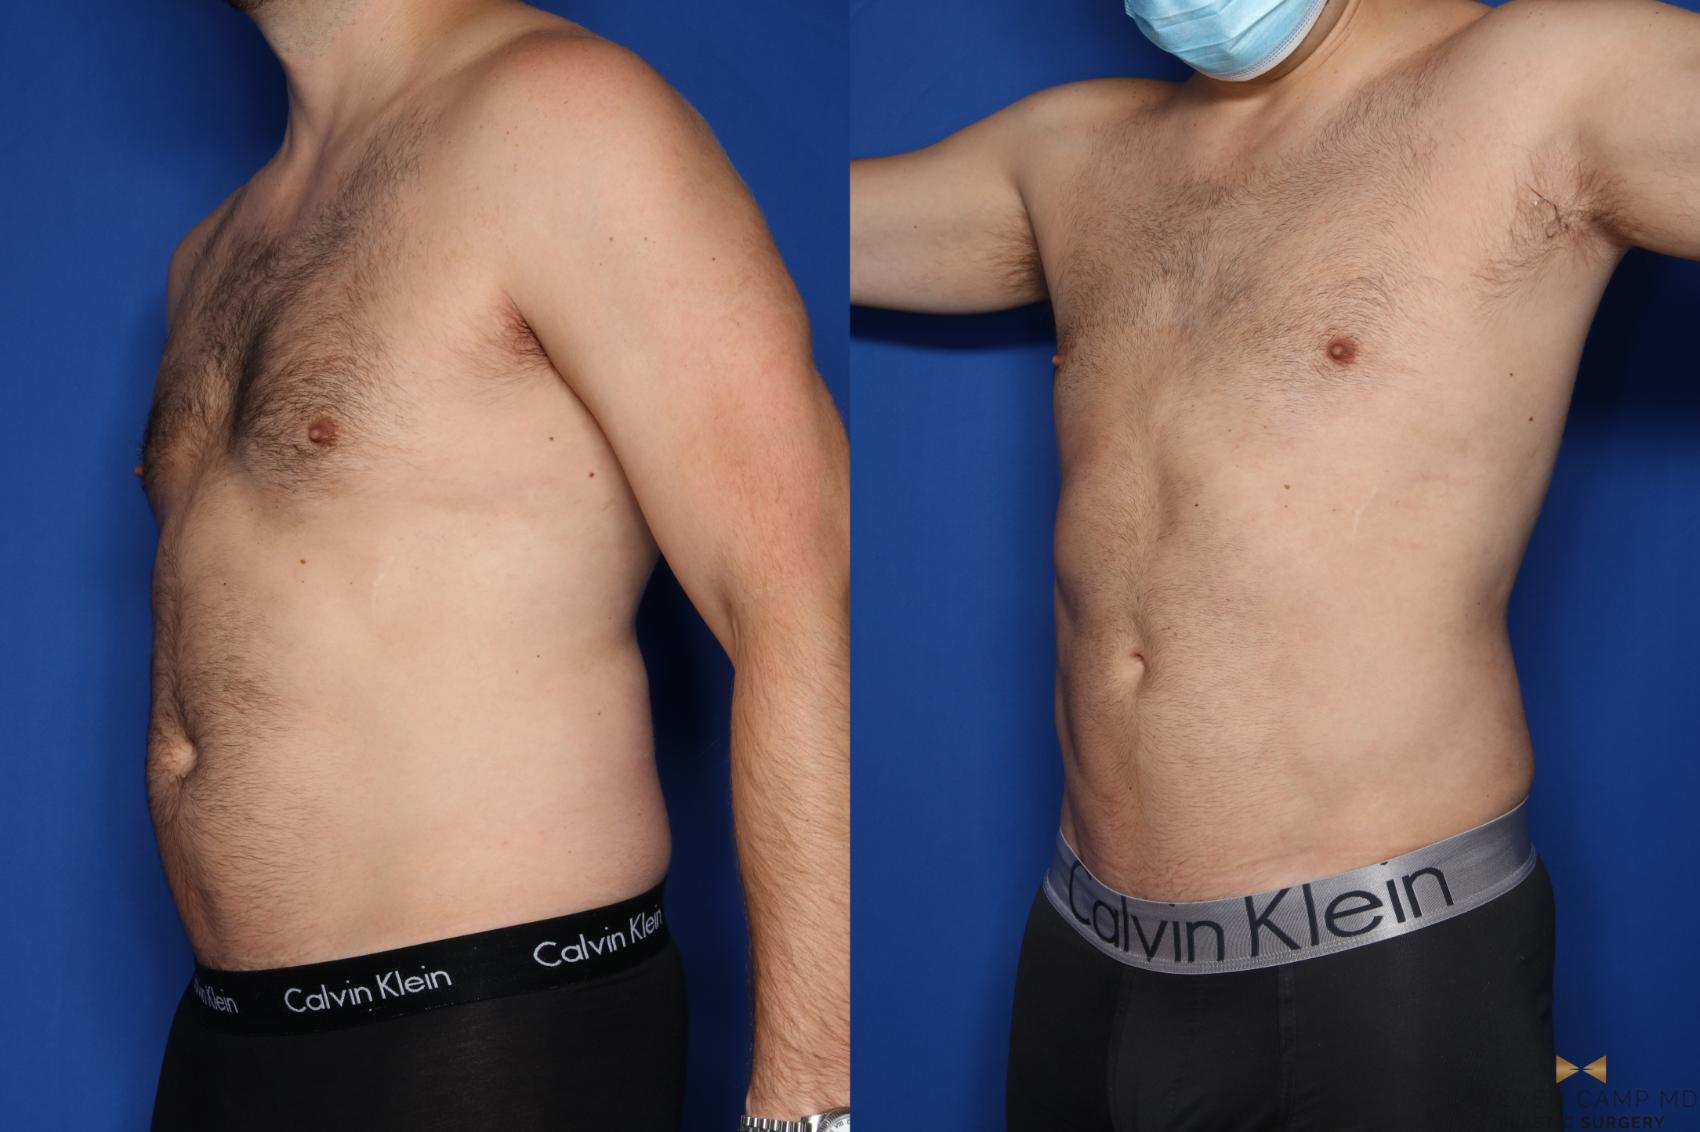 Liposuction Before & After Photo | Fort Worth, Texas | Steven Camp MD Plastic Surgery